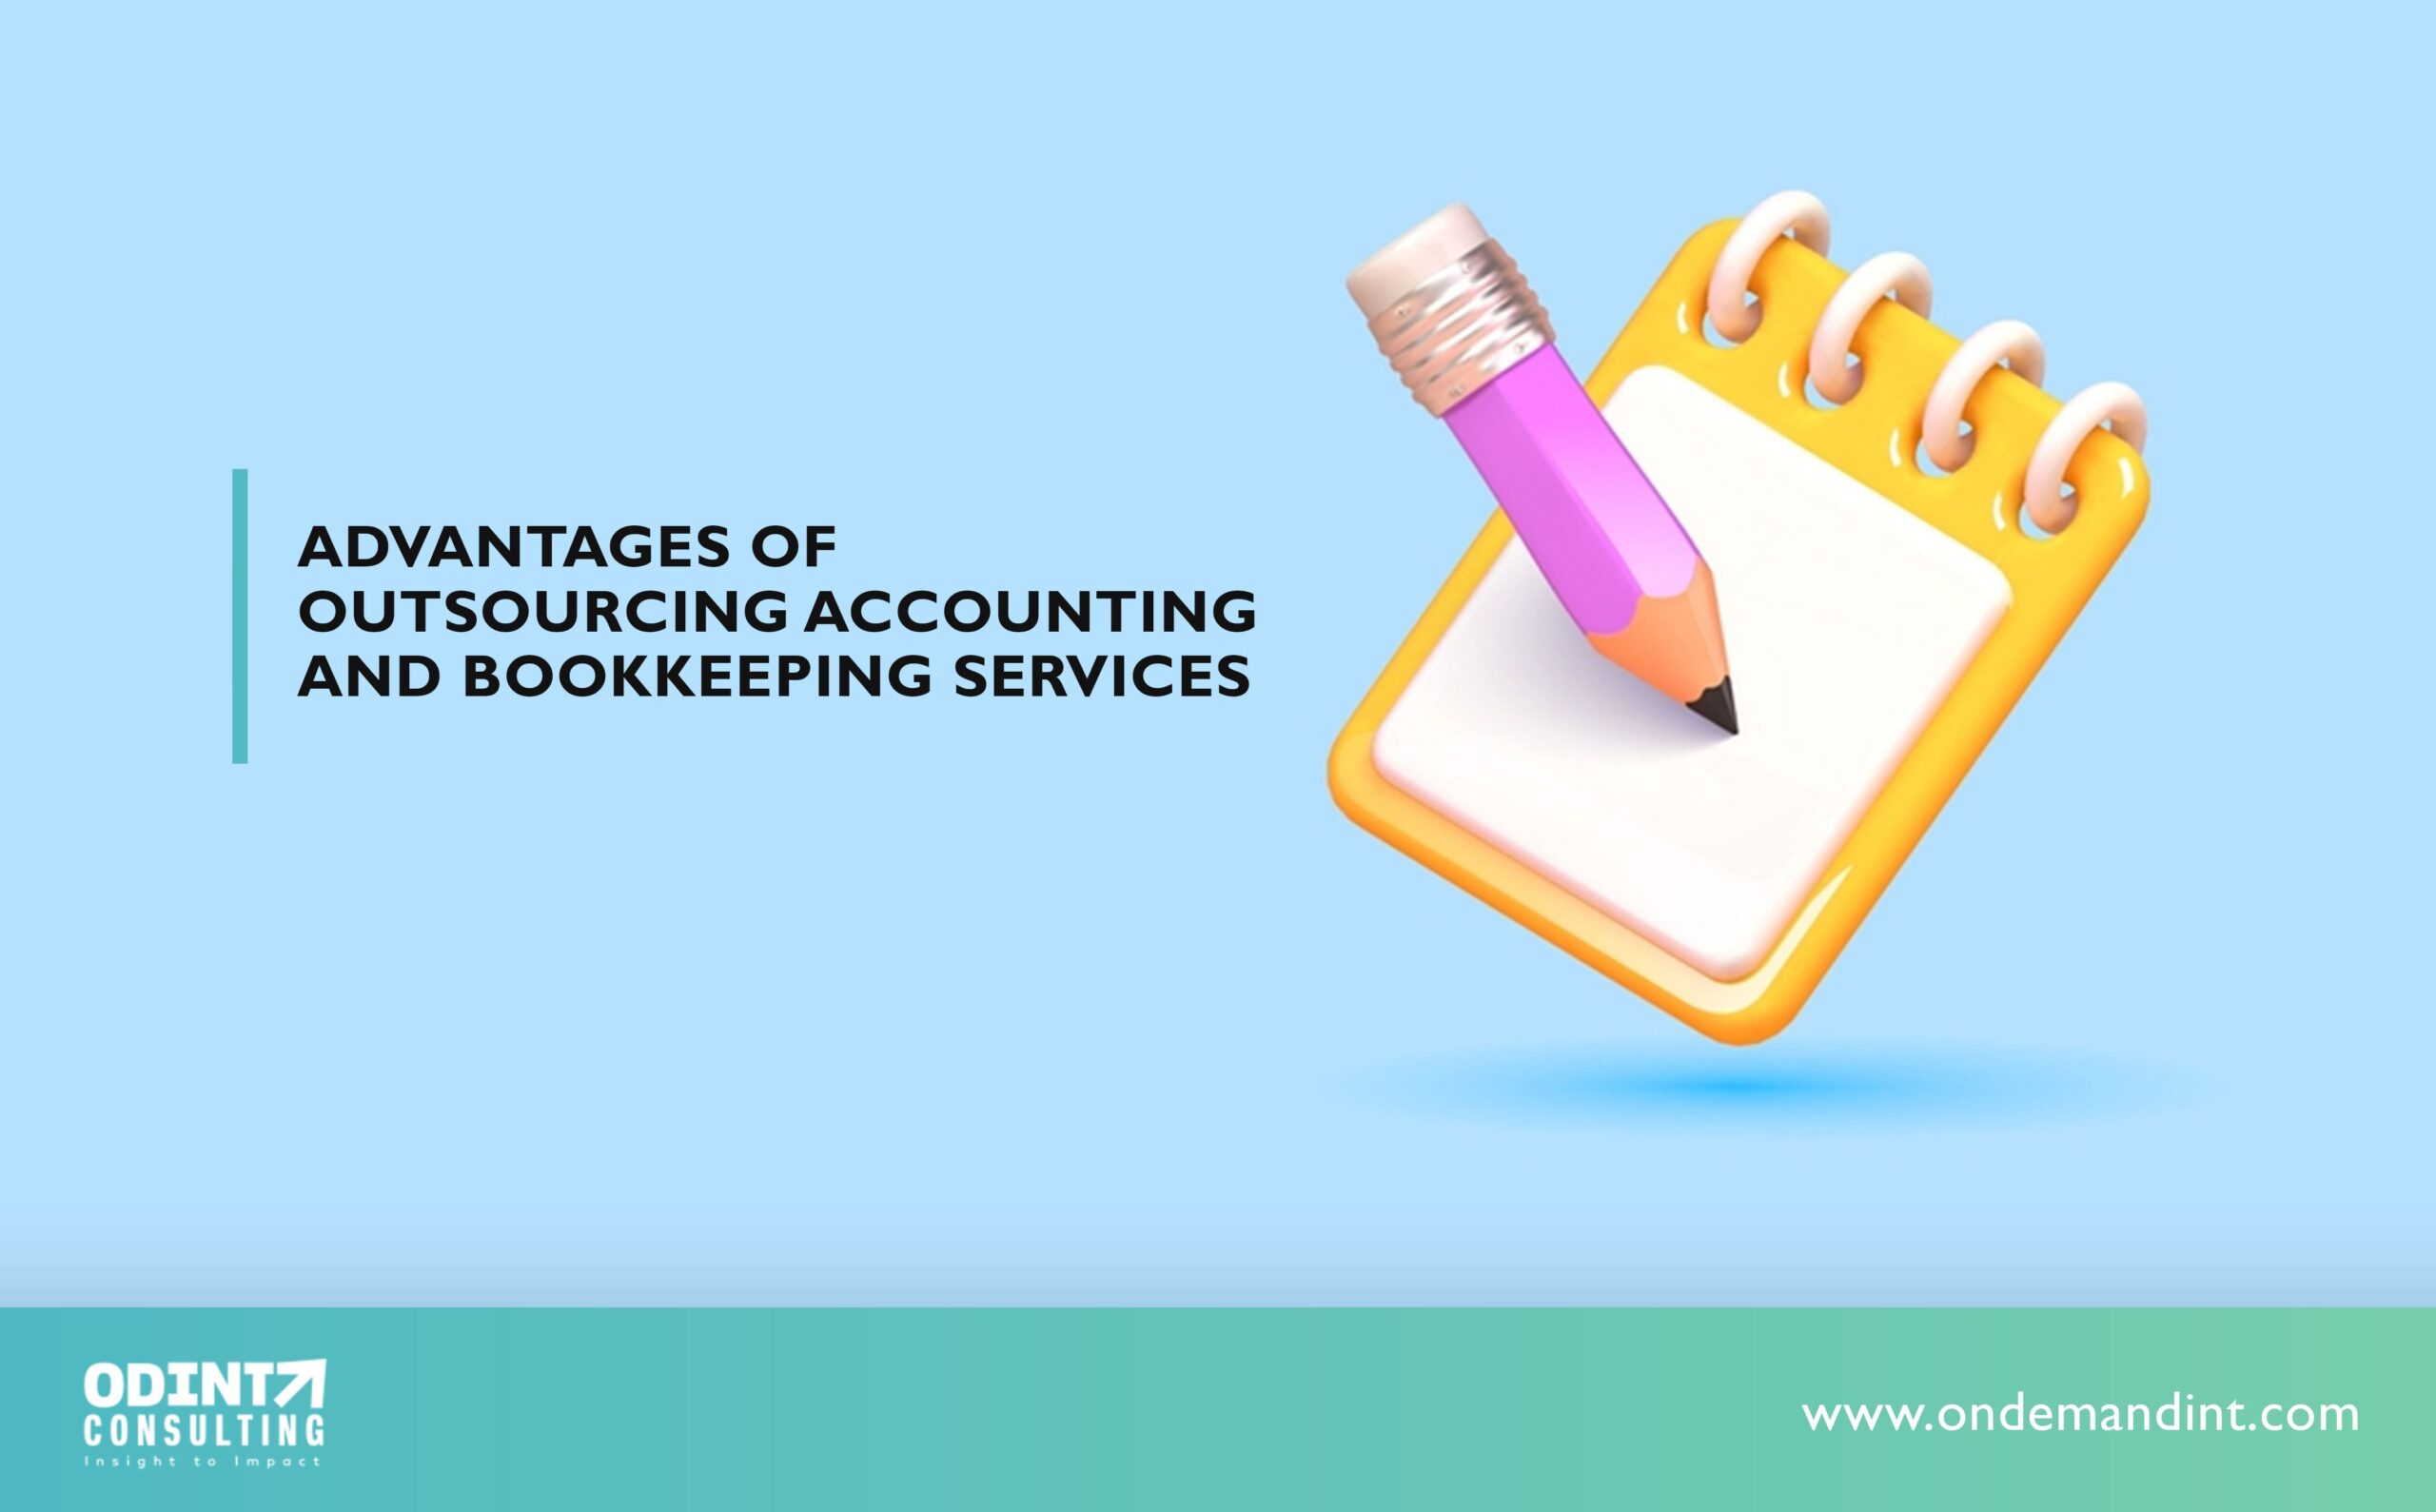 11 Advantages of Outsourcing Accounting and Bookkeeping Services